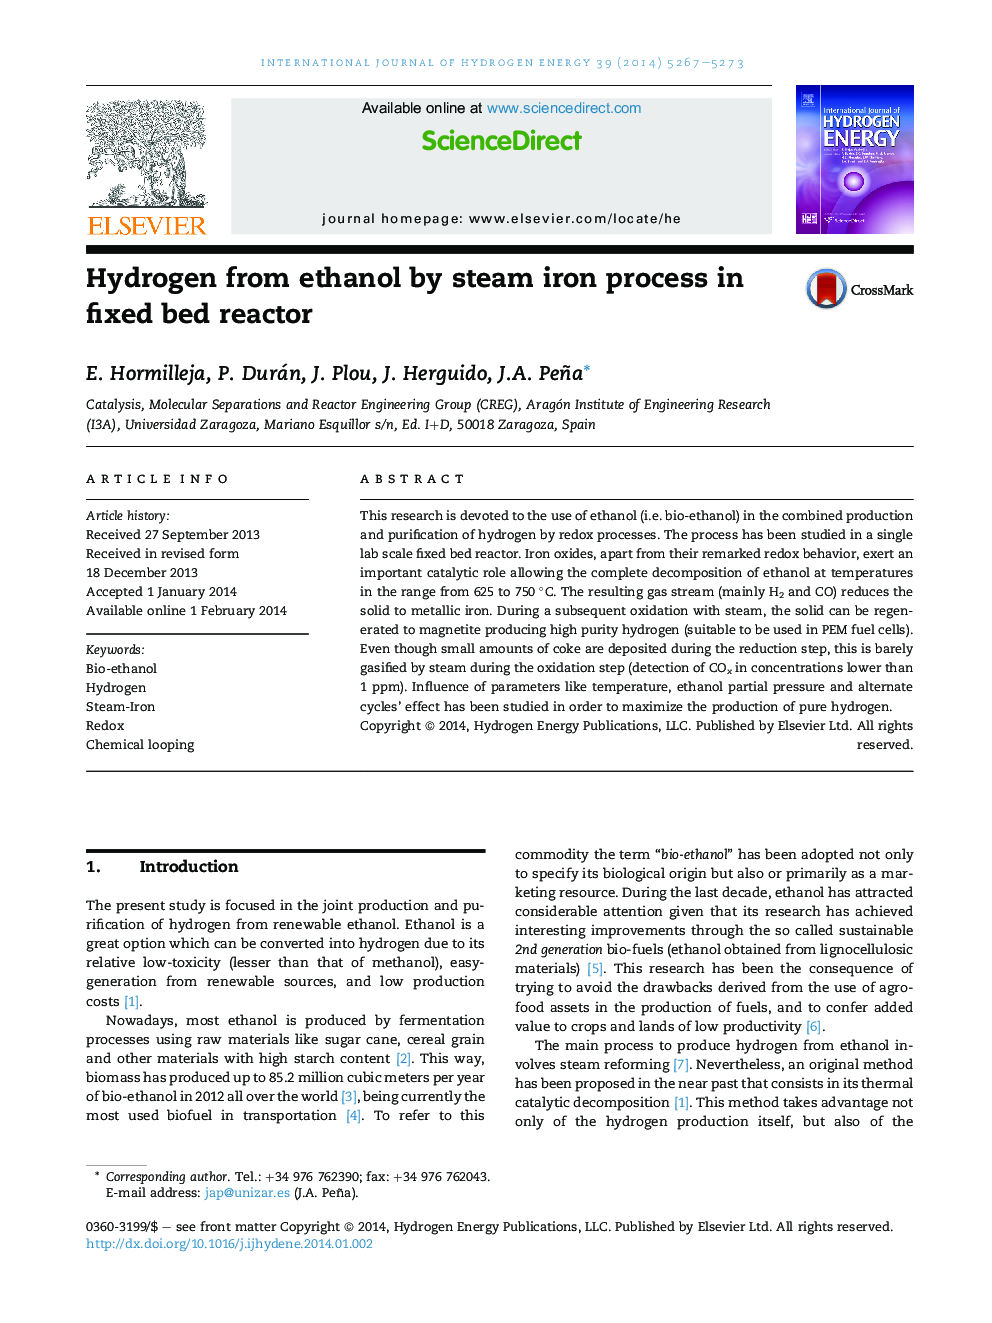 Hydrogen from ethanol by steam iron process in fixed bed reactor